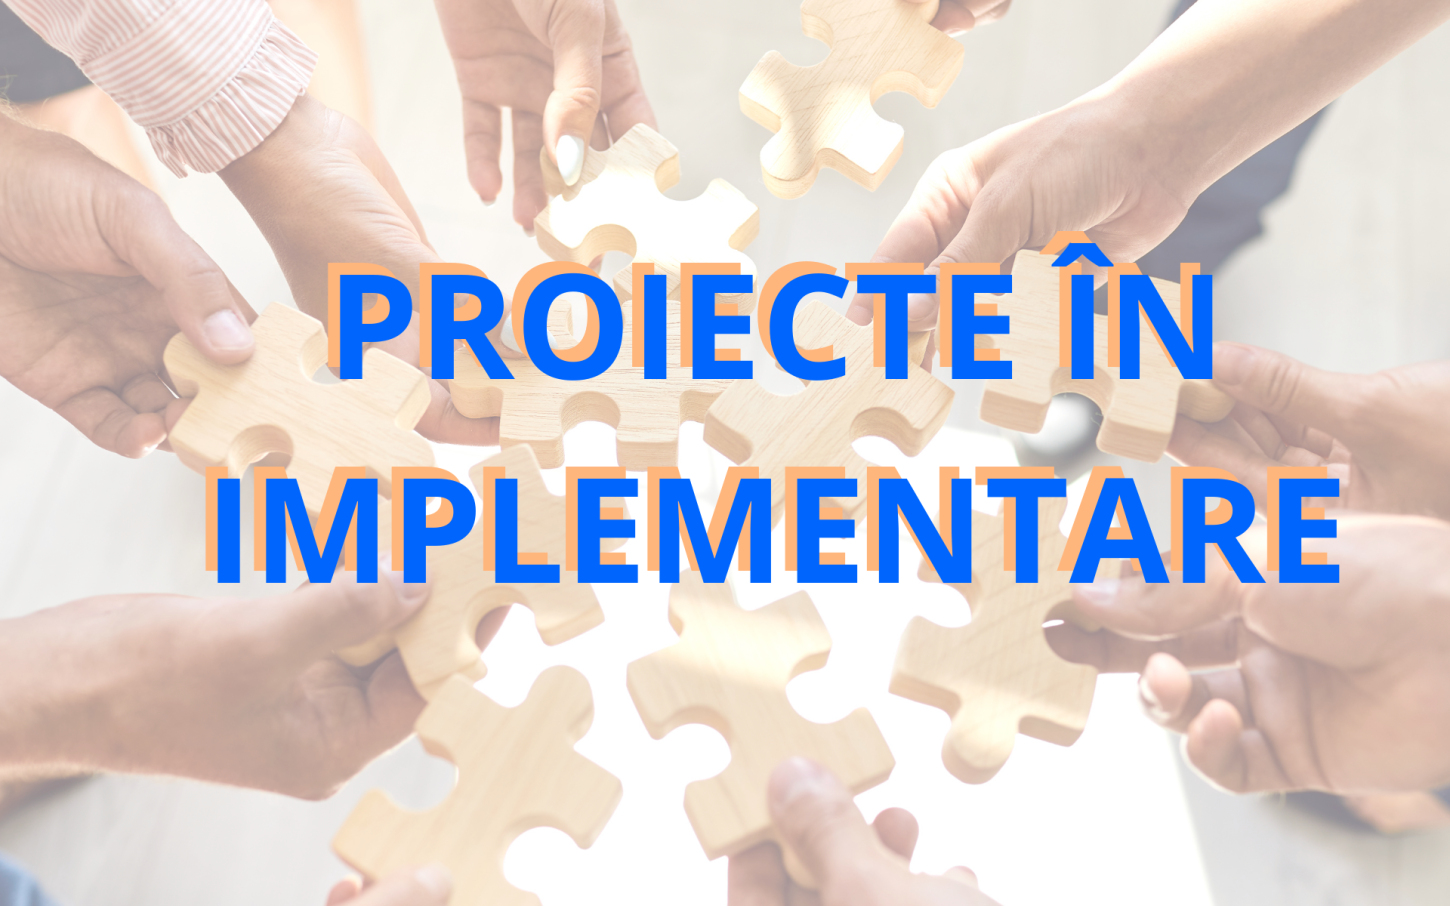 Projects in implementation